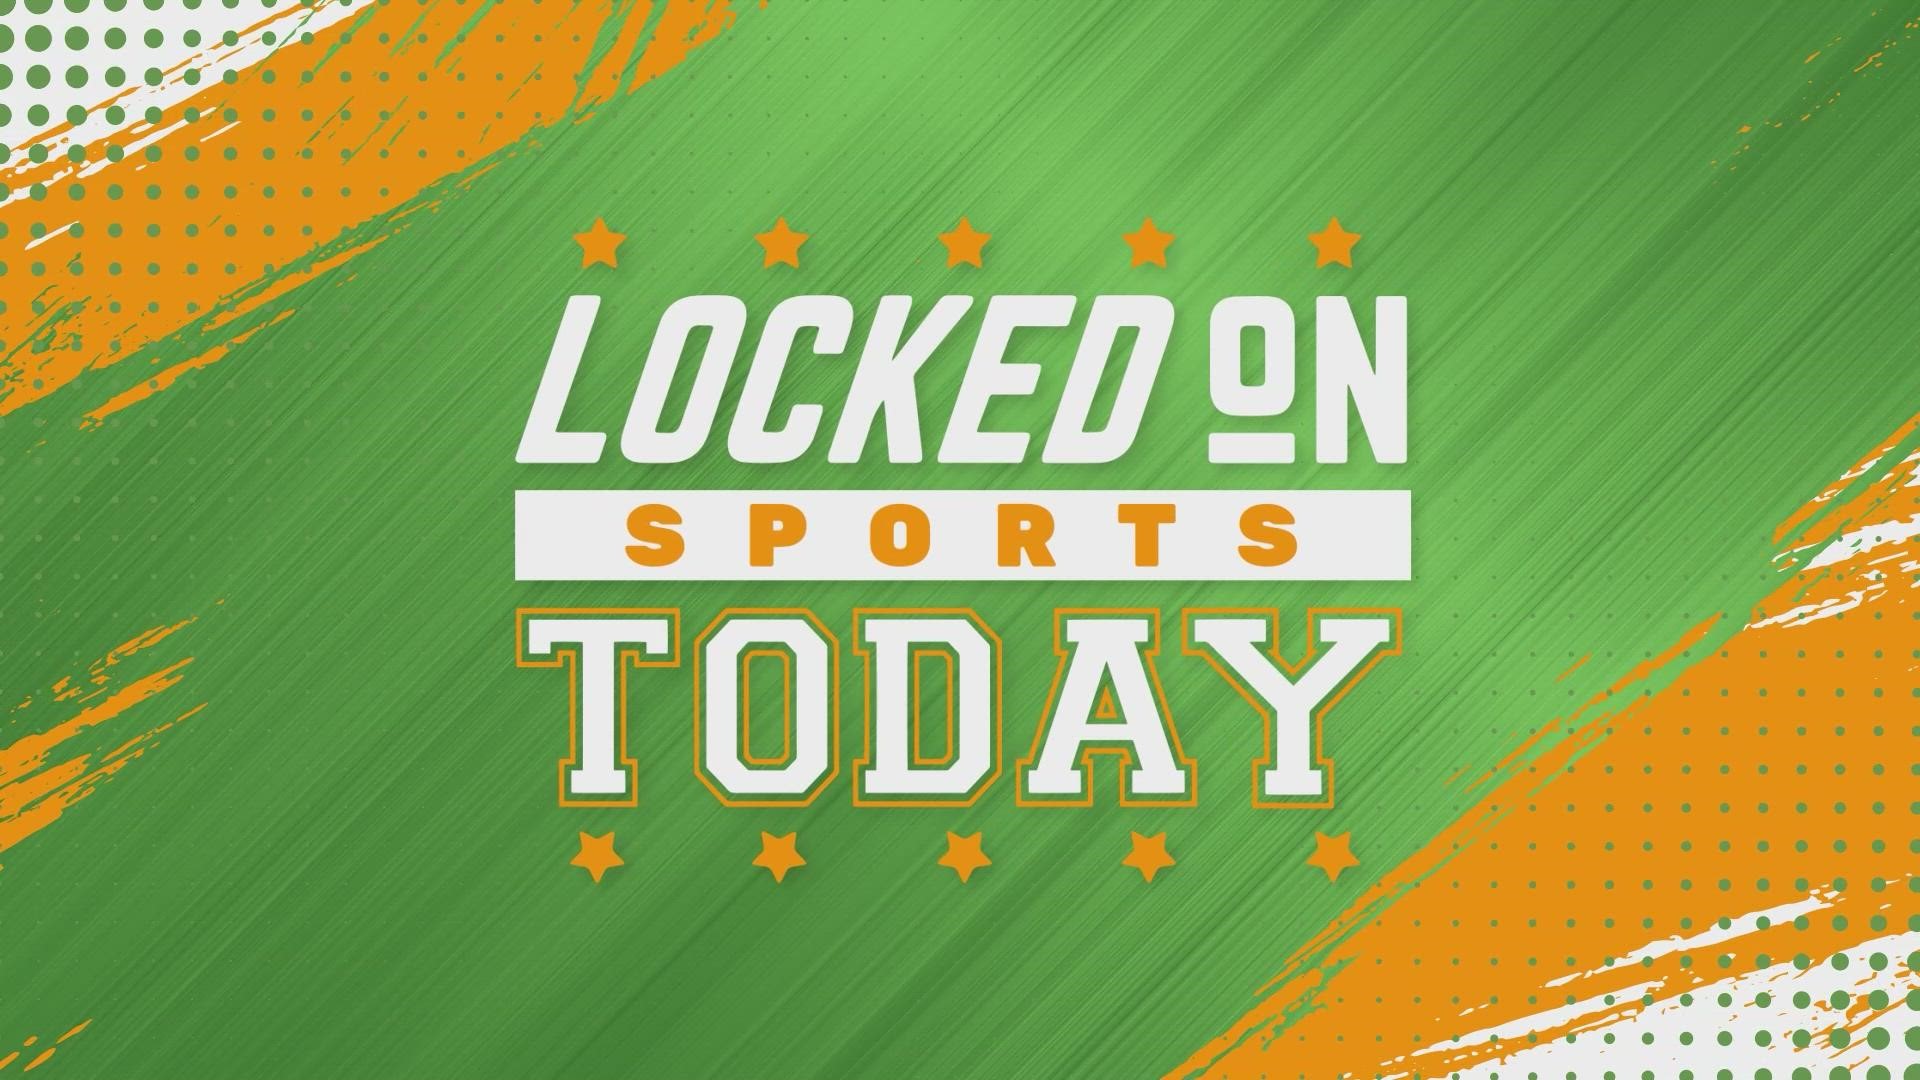 7-time NBA champion Robert Horry gives his thoughts on the Celtics-Warriors NBA Finals series on the Locked On Sports Today podcast.